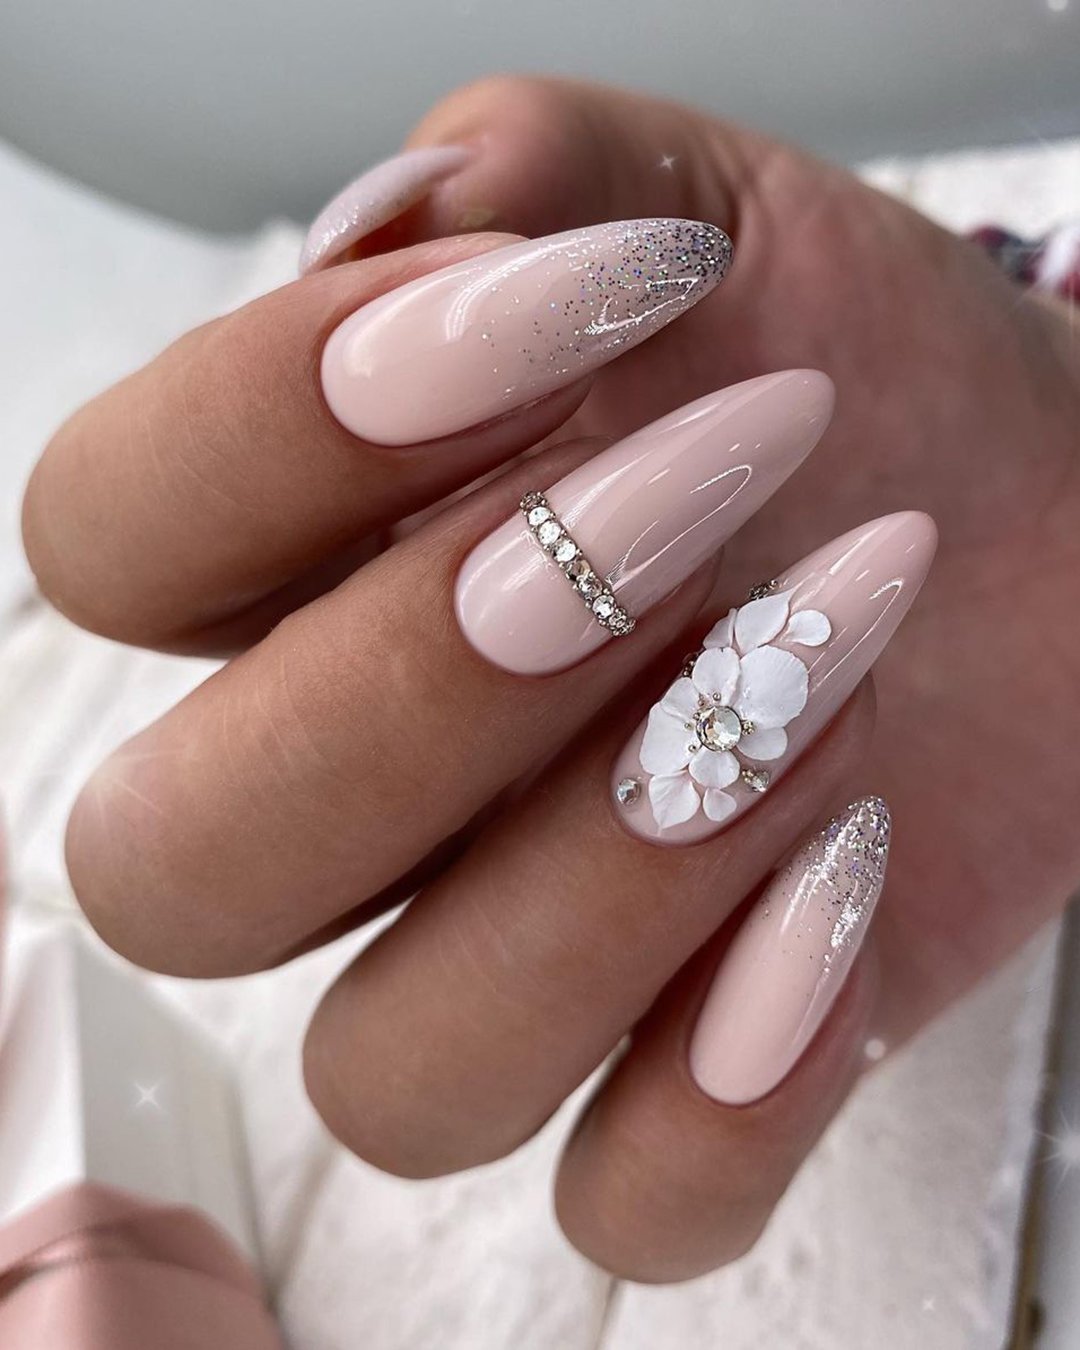 nail ideas for wedding with white gentle flowers milana.gen11